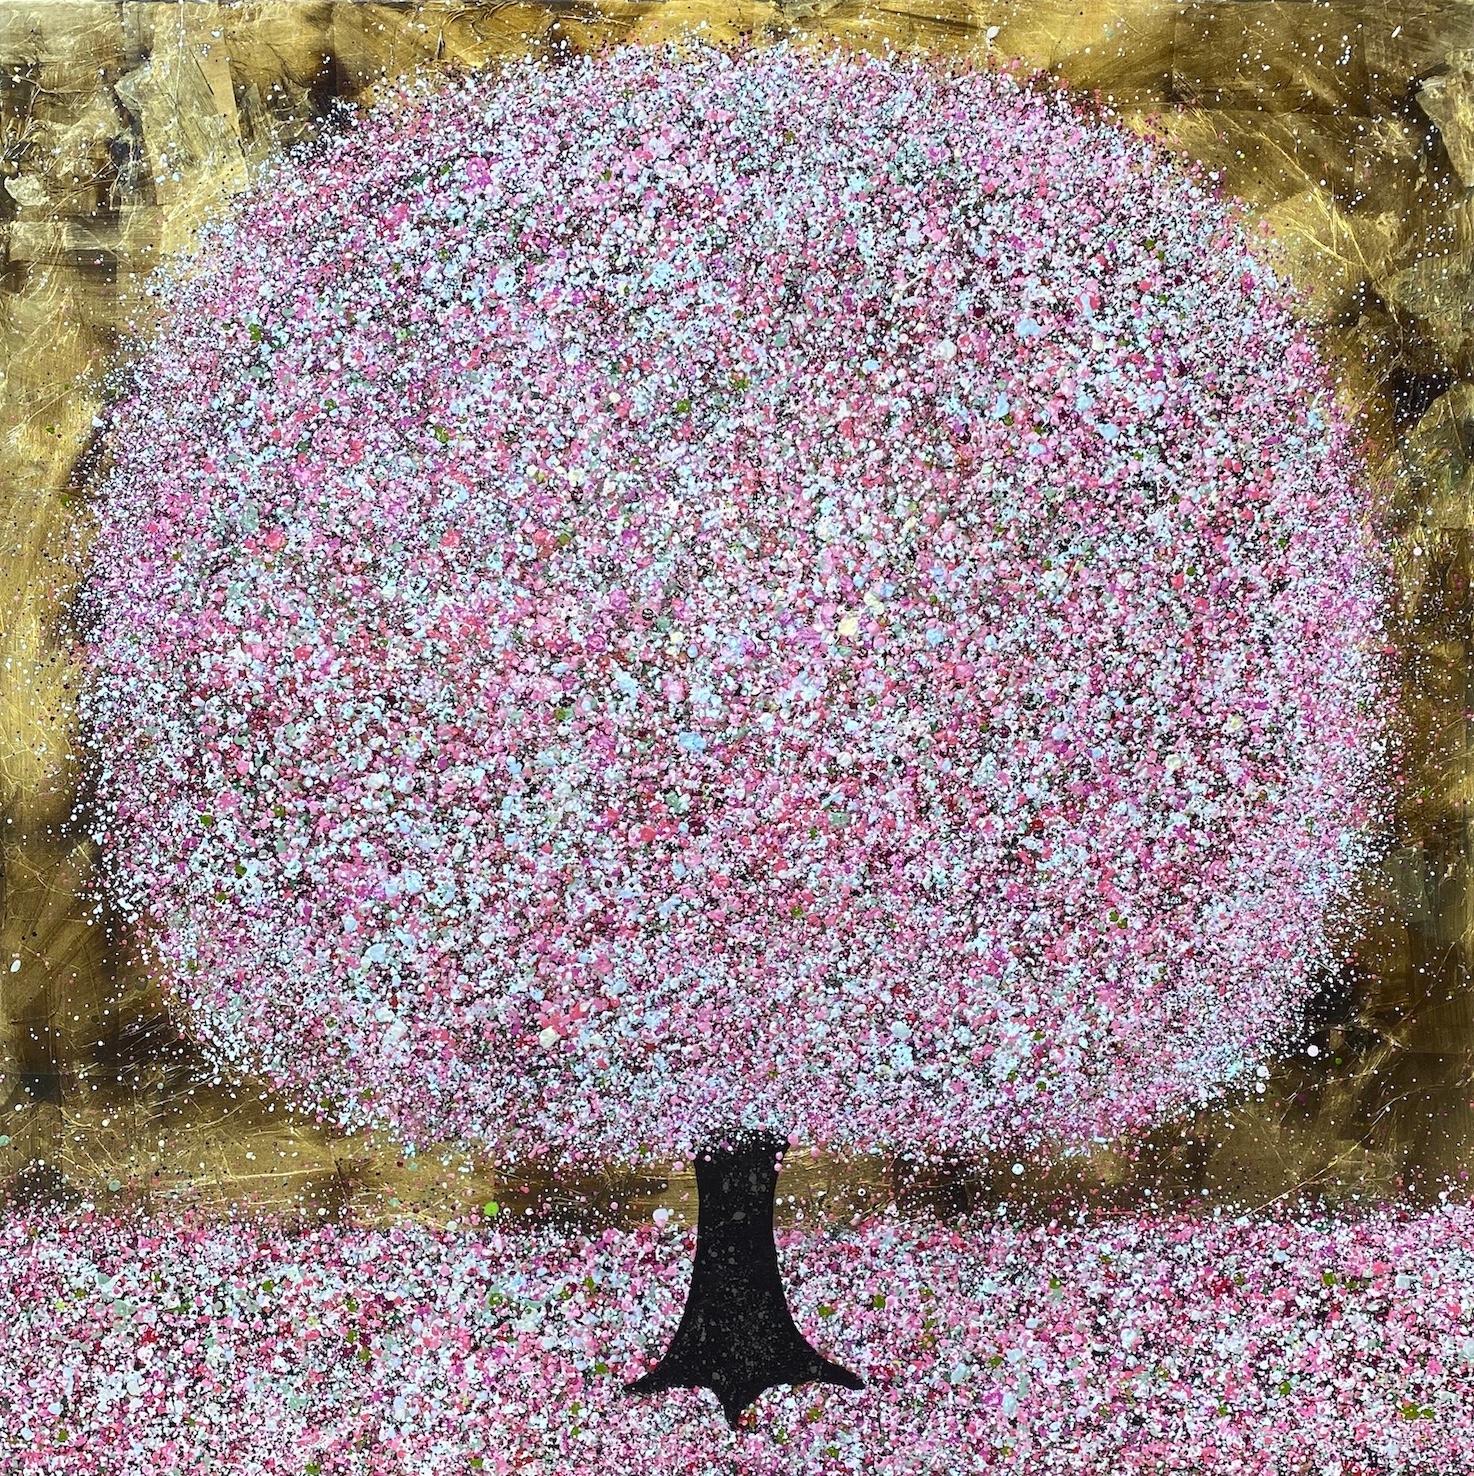 Nicky Chubb
Blossoming

Blossoming is an original painting by Nicky Chubb. This is a large scale painting with a cheerful pink blossom coloured tree, complemented by the brushed textured gold background.

Additional information:
Original Abstract